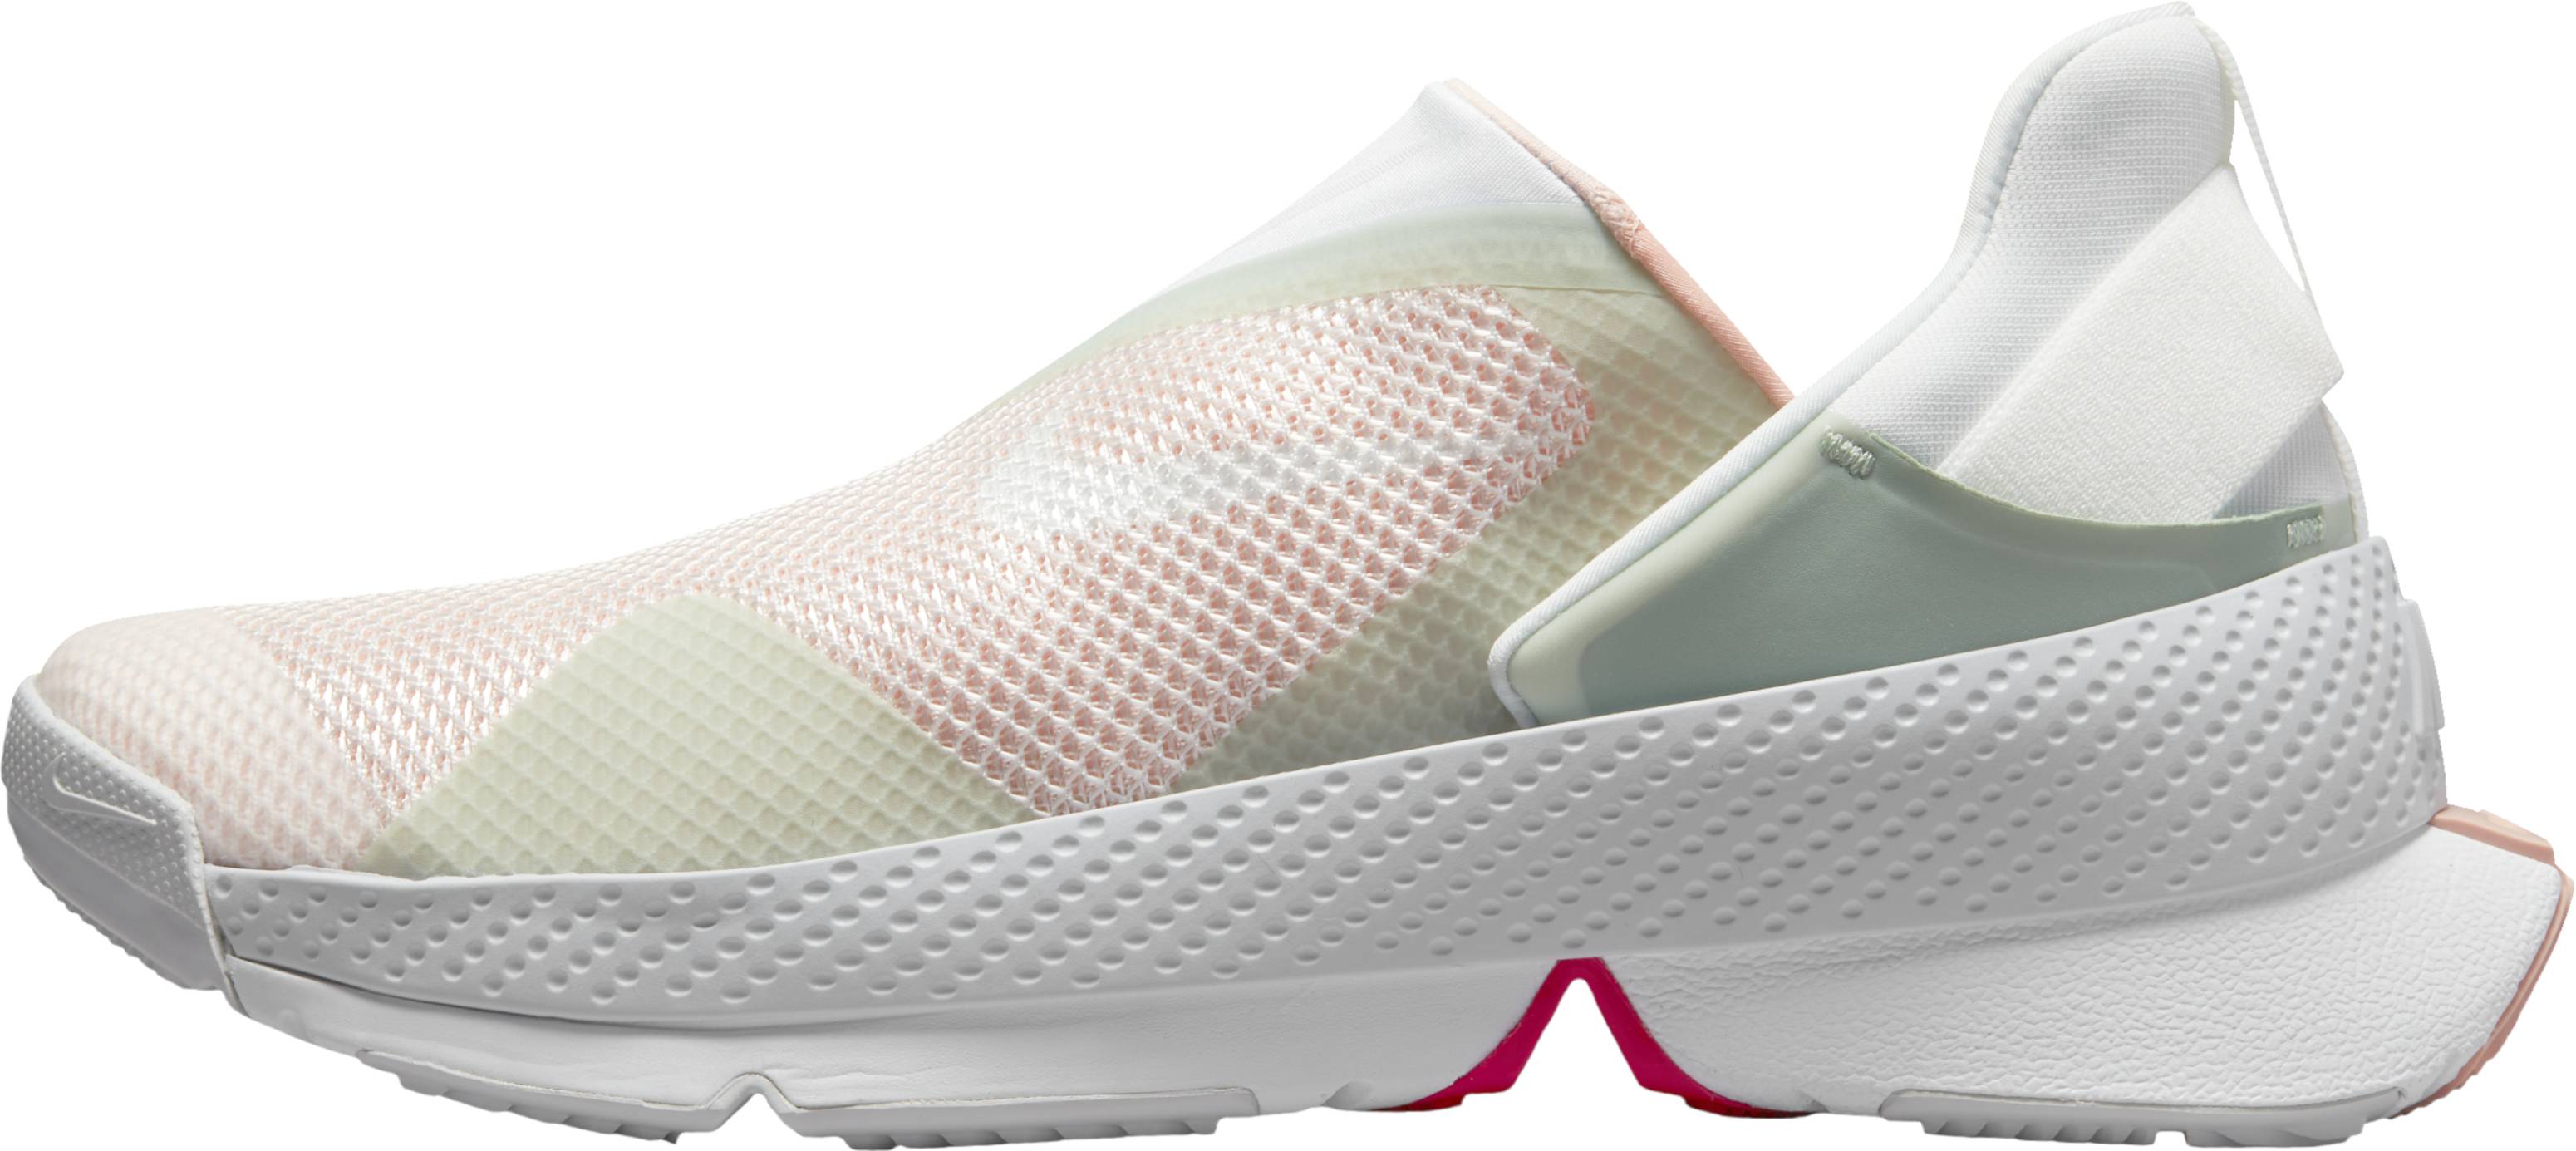 Nike Go FlyEase sneakers in 10+ colors (only $93) | RunRepeat